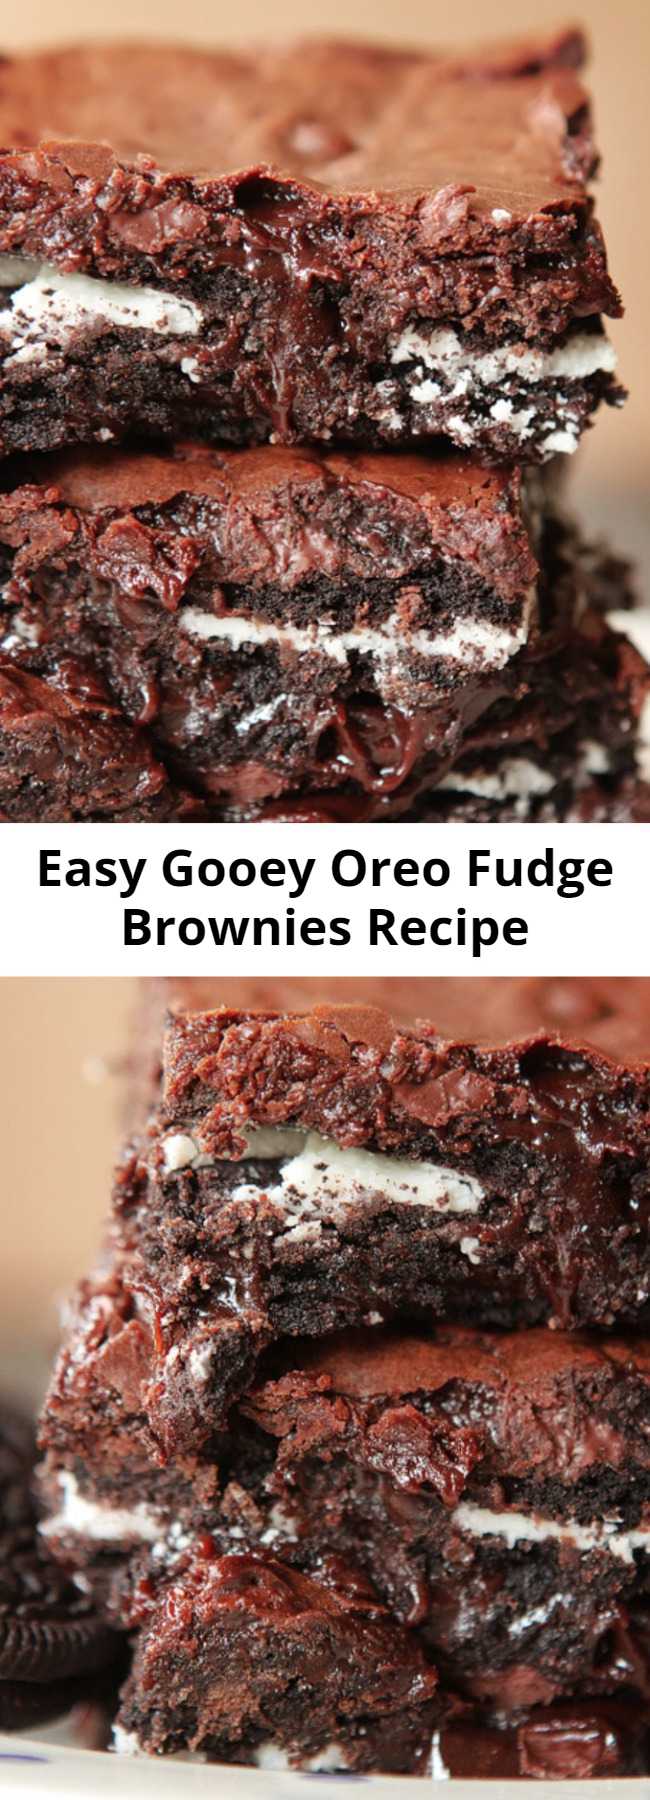 Easy Gooey Oreo Fudge Brownies Recipe - This easy Oreo Fudge Brownies recipe seriously makes the most chewy, fudgy brownies ever! If you love gooey and fudgy brownies, you have to try this trick ASAP.